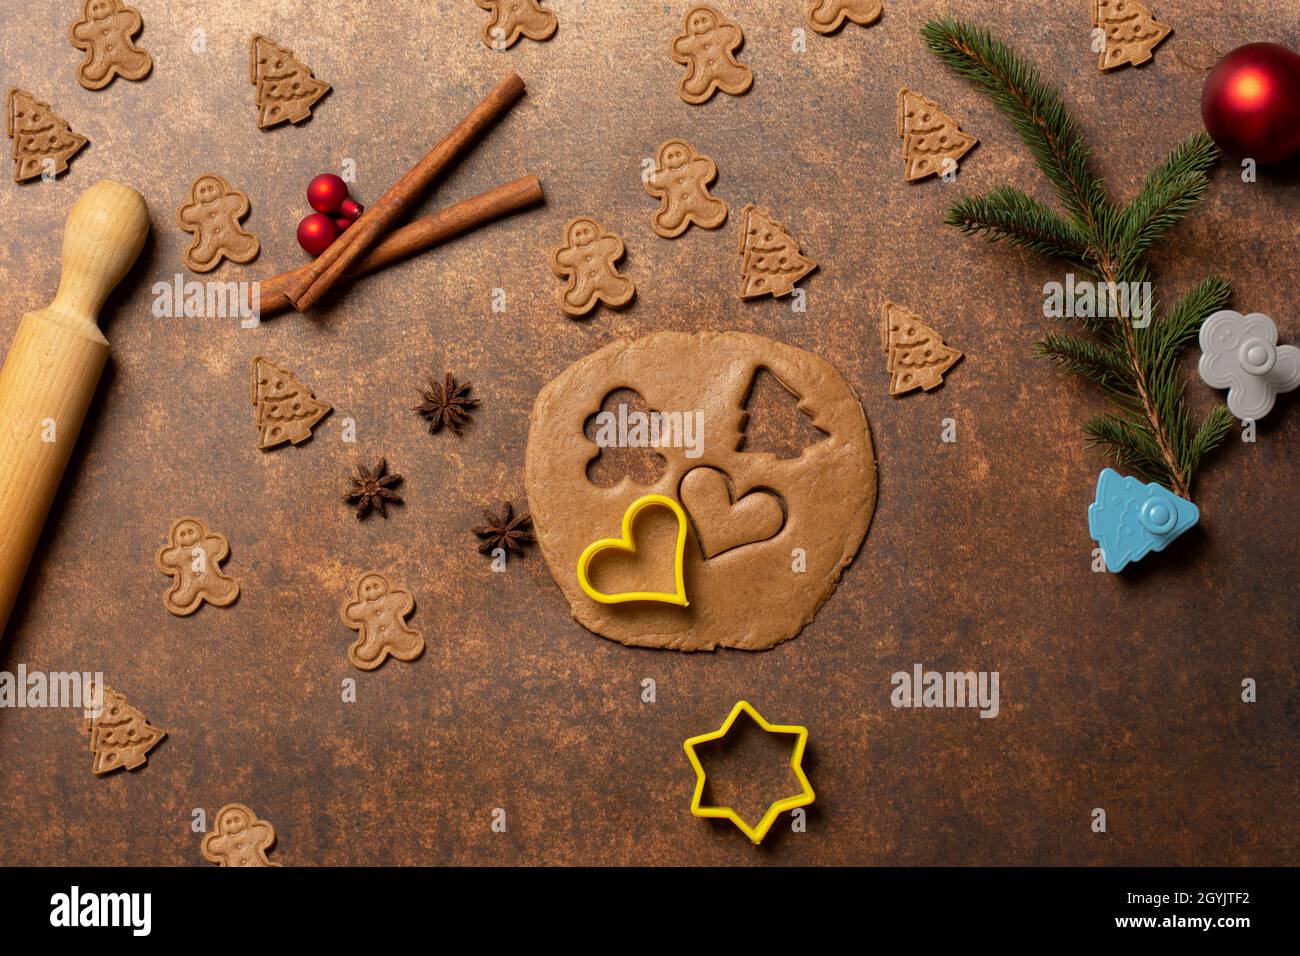 It is all full of joy, smiles, and excitement! Gingerbread cookies are fun to make! They are the essence of the holidays. Stock Photo